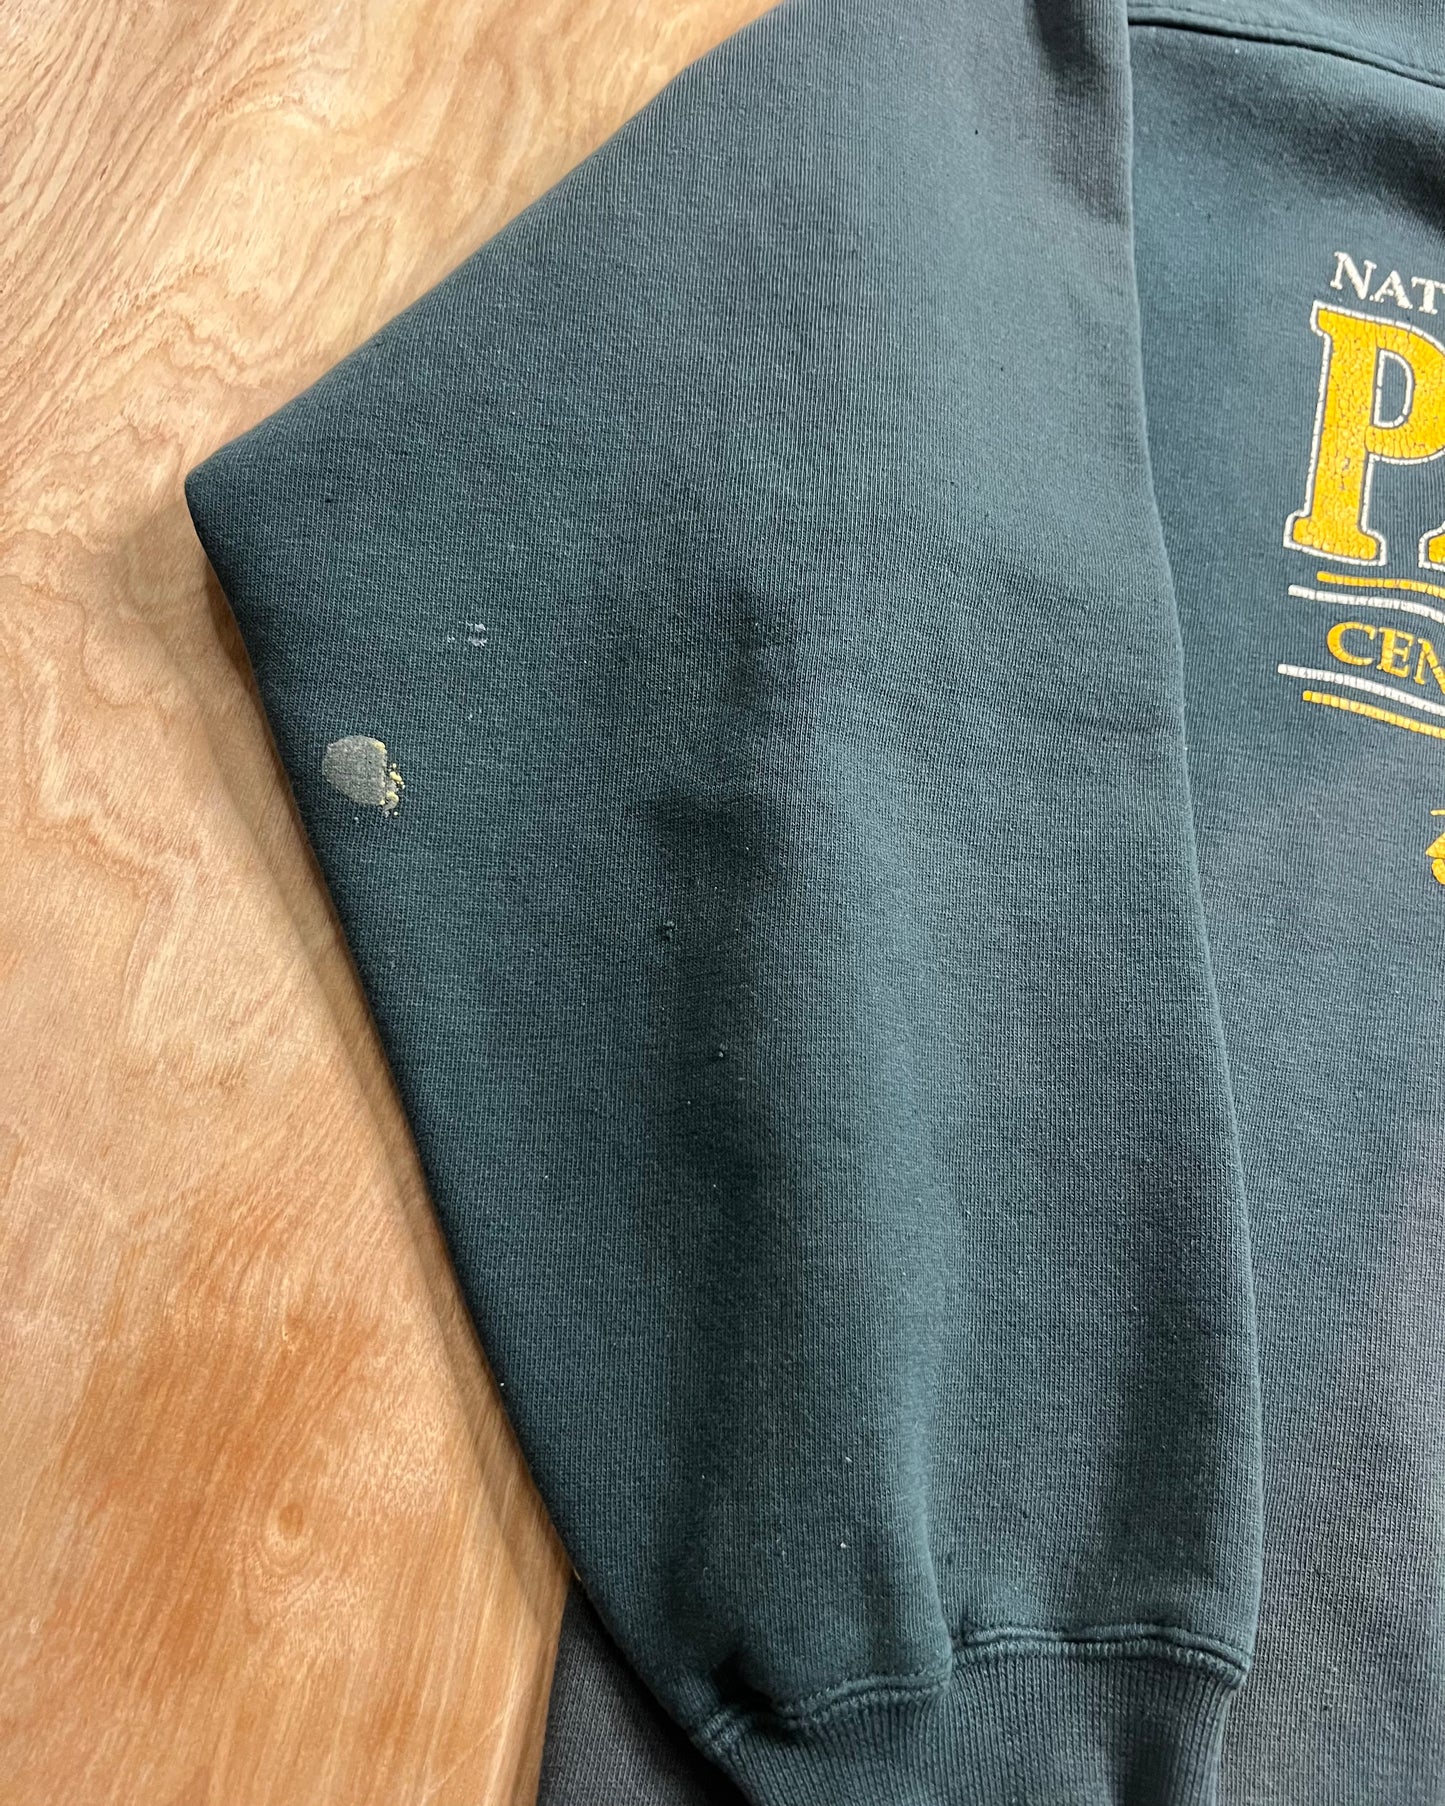 1996 Green Bay Packers Central Division Champions Crewneck